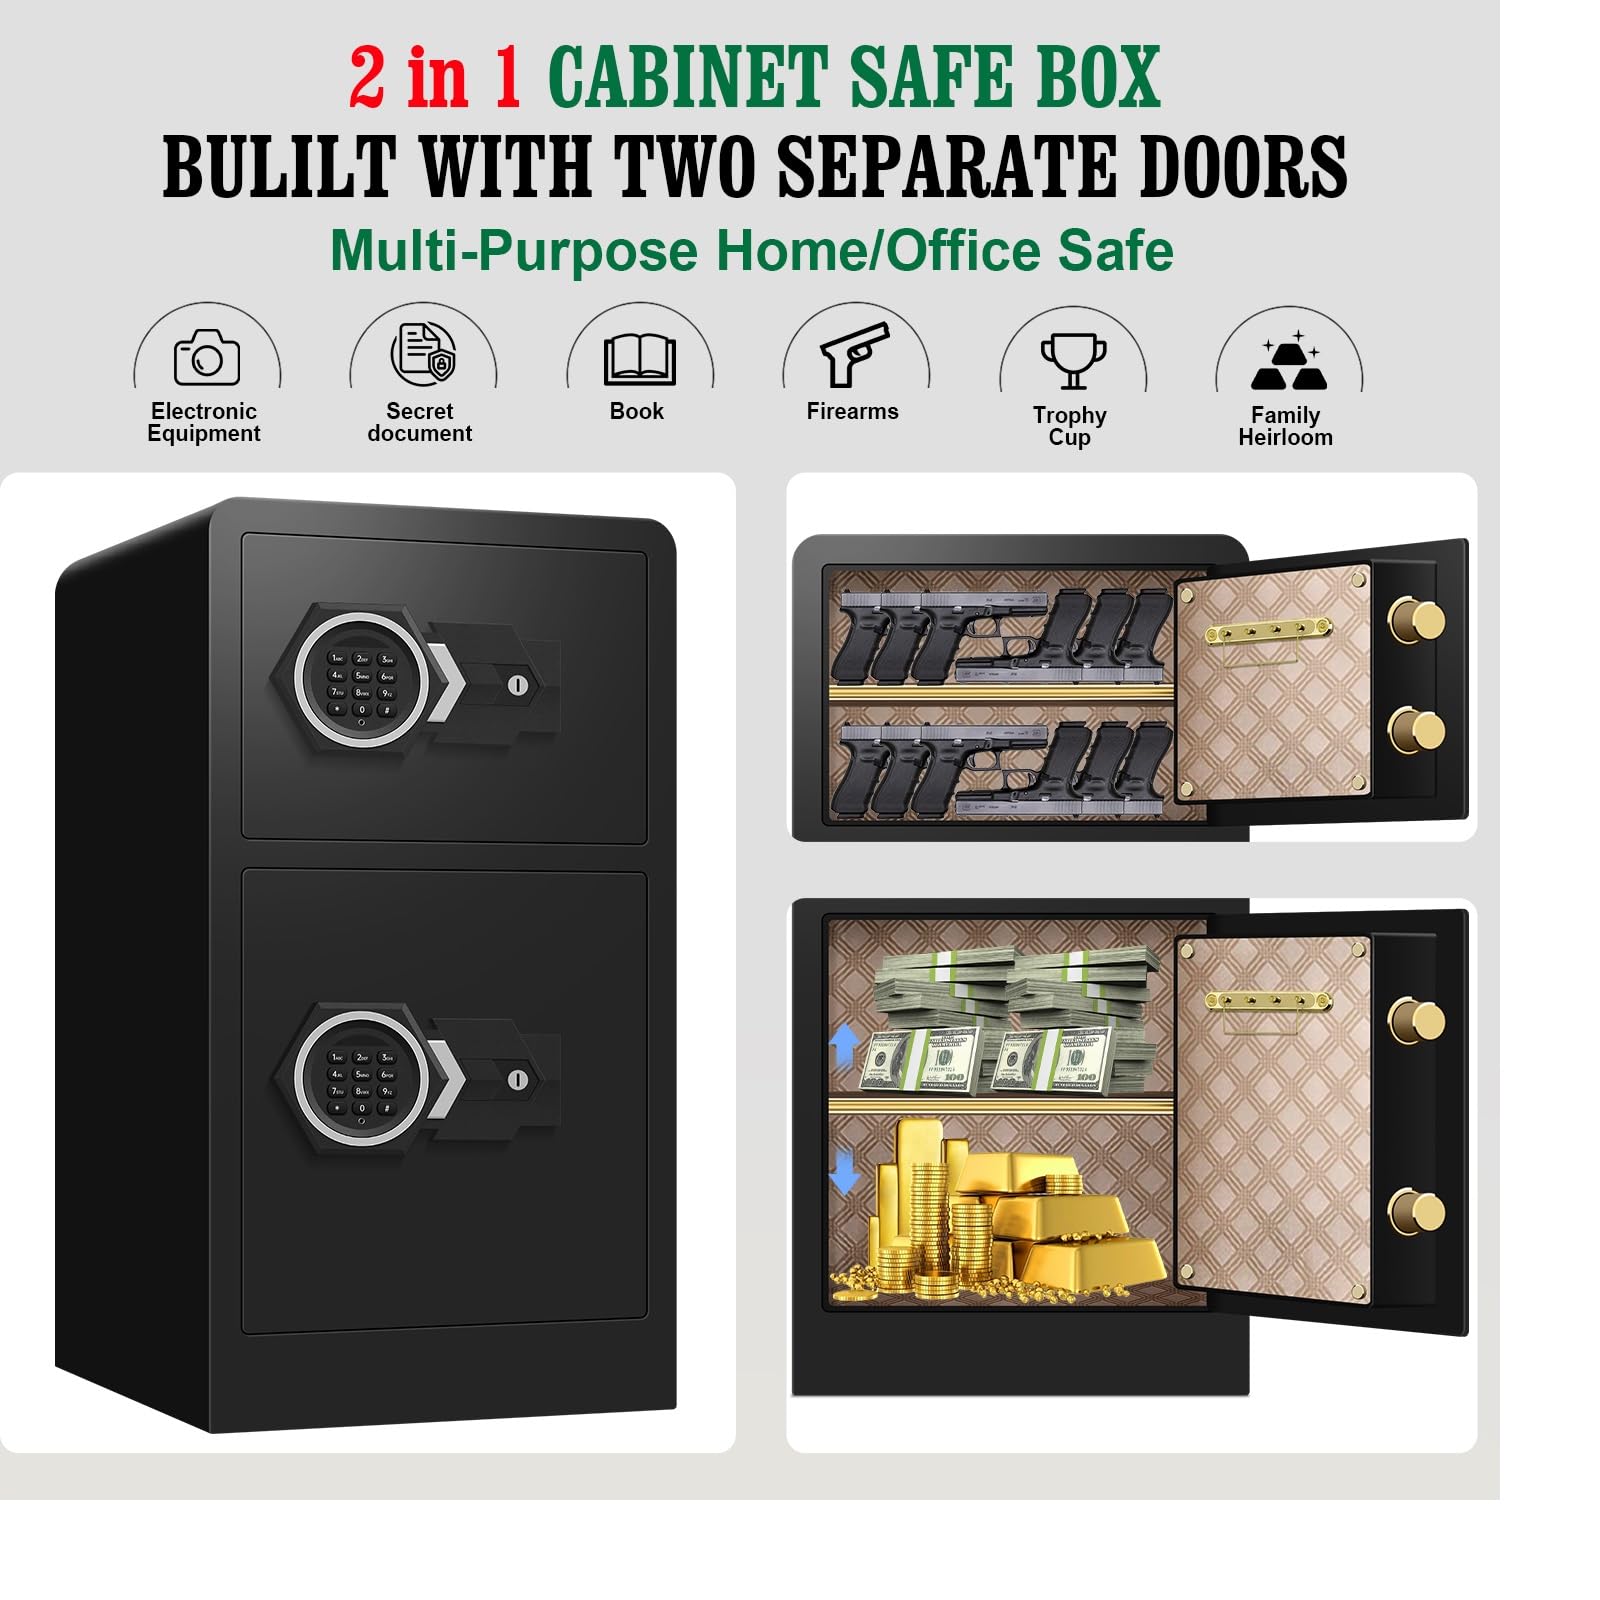 6.1 Cu ft Extra Large Home Safe Fireproof Waterproof, Anti-Theft Digital Home Security Safe Box With Hidden Compartment, Double Safes, Separate Lock Box and Led Light（31.1" x 17.0" x 15.9"）